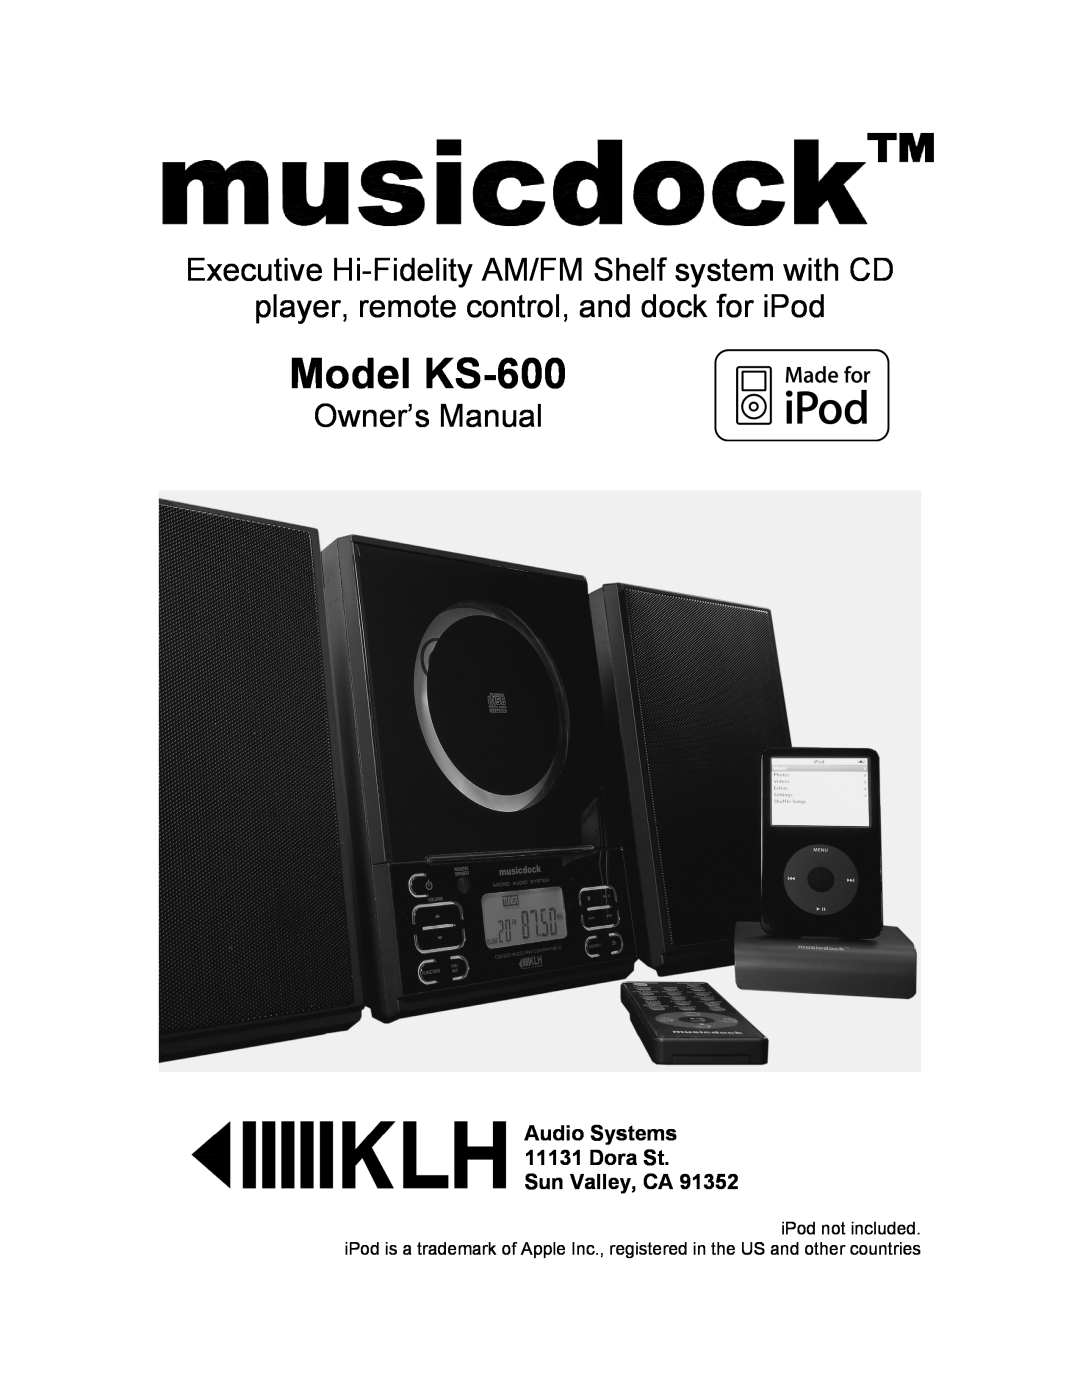 KLH owner manual Audio Systems 11131 Dora St Sun Valley, CA, Model KS-600, player, remote control, and dock for iPod 